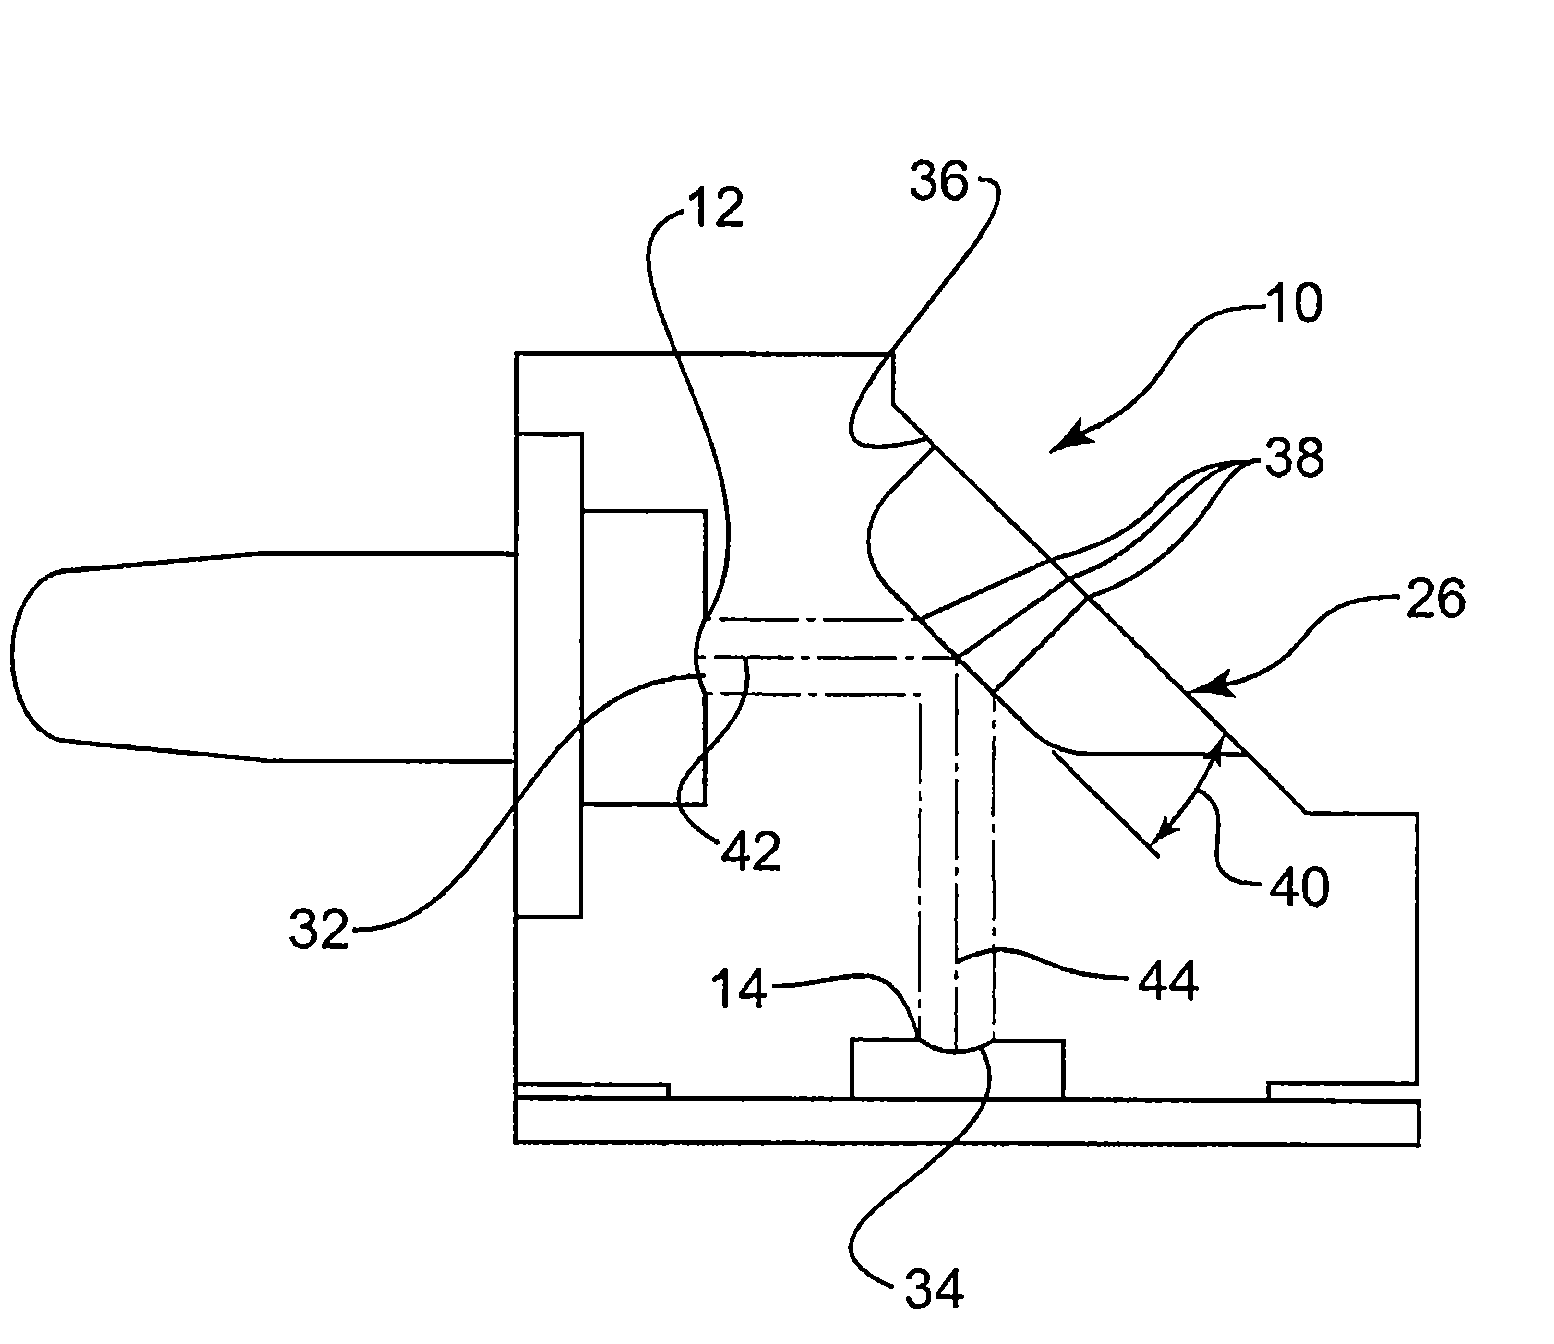 Lens array with integrated folding mirror